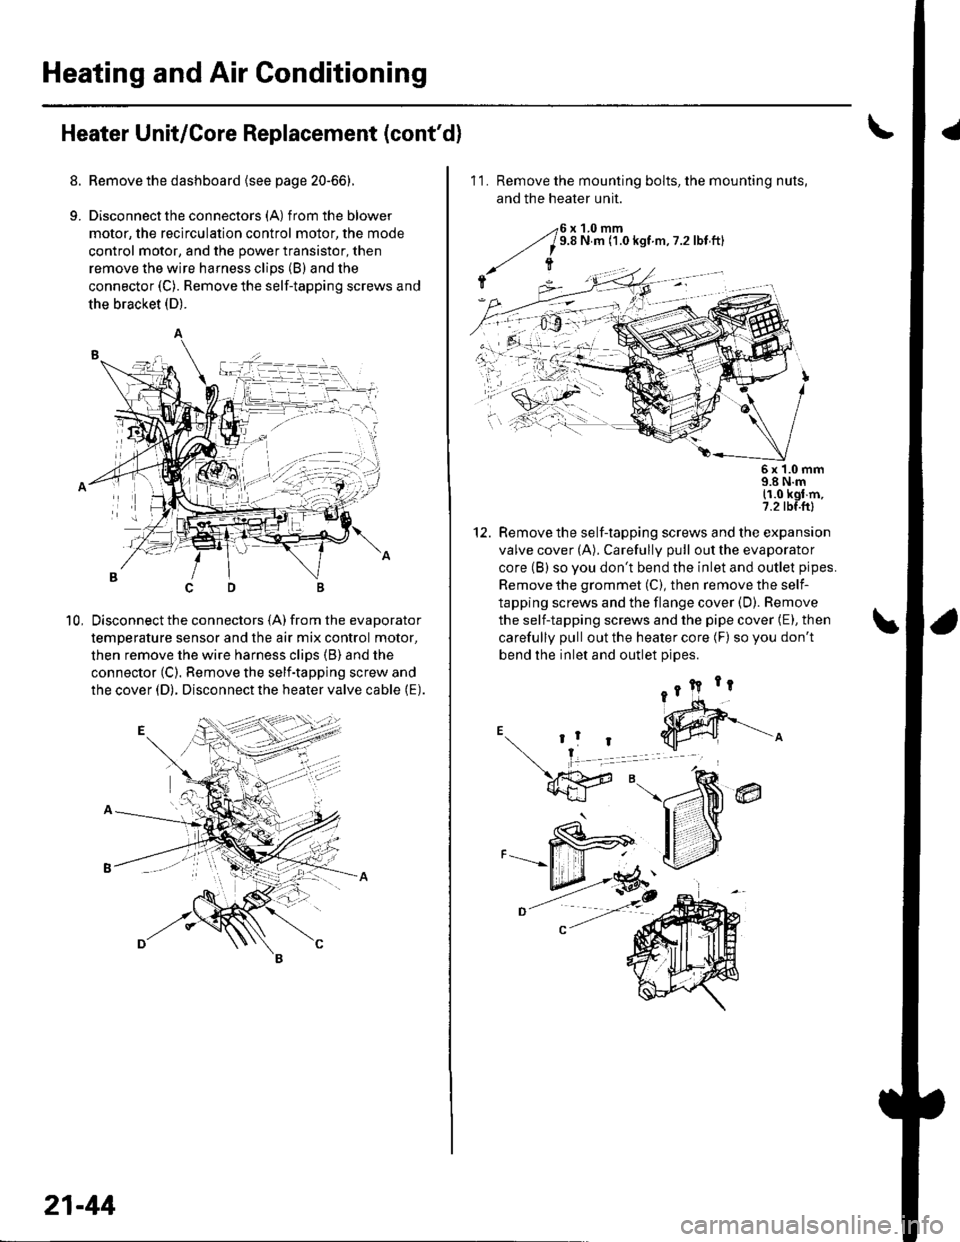 HONDA CIVIC 2003 7.G Workshop Manual Heating and Air Conditioning
Heater Unit/Core Replacement (contd)
8. Remove the dashboard {see page 20-66).
9. Disconnectthe connectors (A) from the blower
motor, the recirculation control motor, the